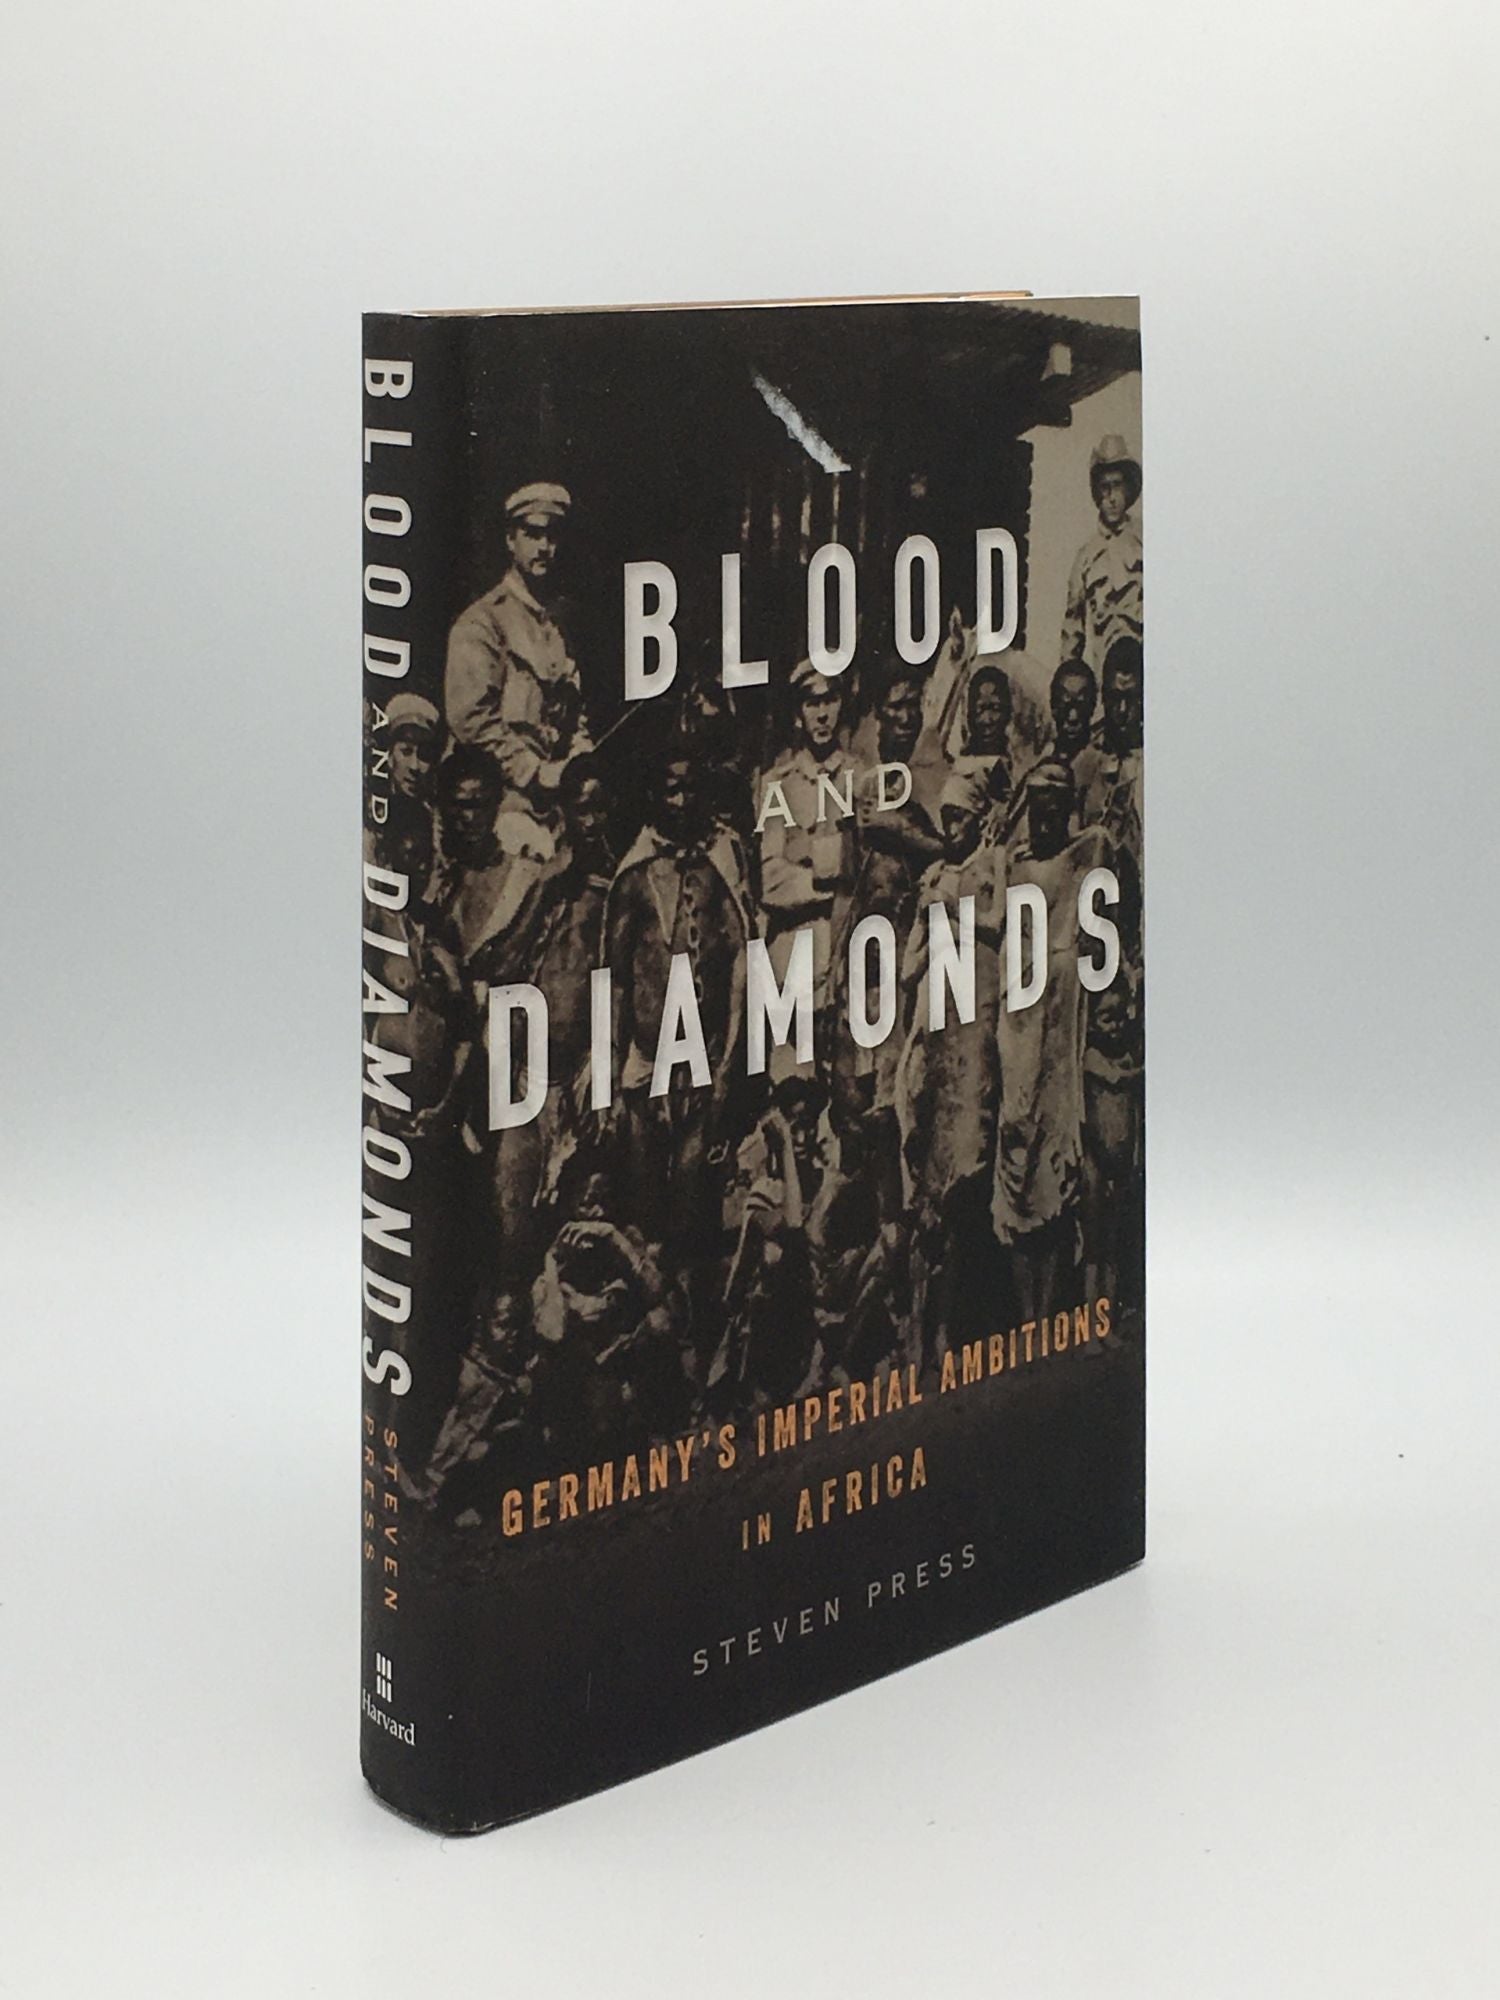 PRESS Steve - Blood and Diamonds Germany's Imperial Ambitions in Africa